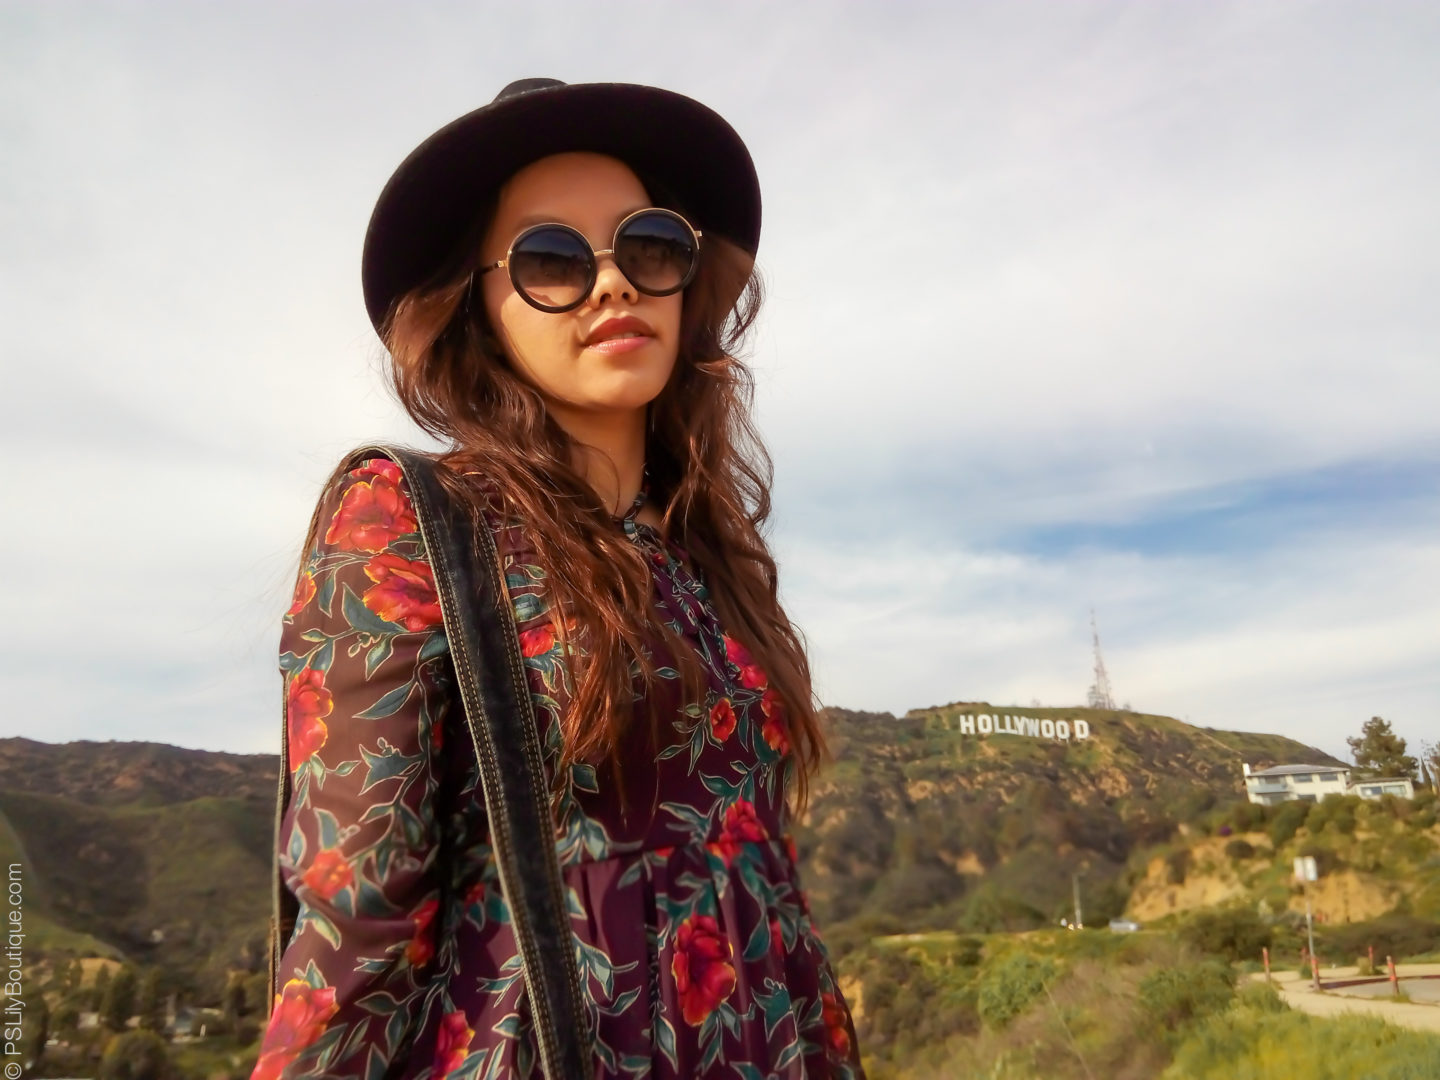 instagram-pslilyboutique-los-angeles-fashion-blogger-hollywood-sign-2017-black-forever-21-wool-hat-floral-maroon-target-dress-winter-2017-outfit-ideas